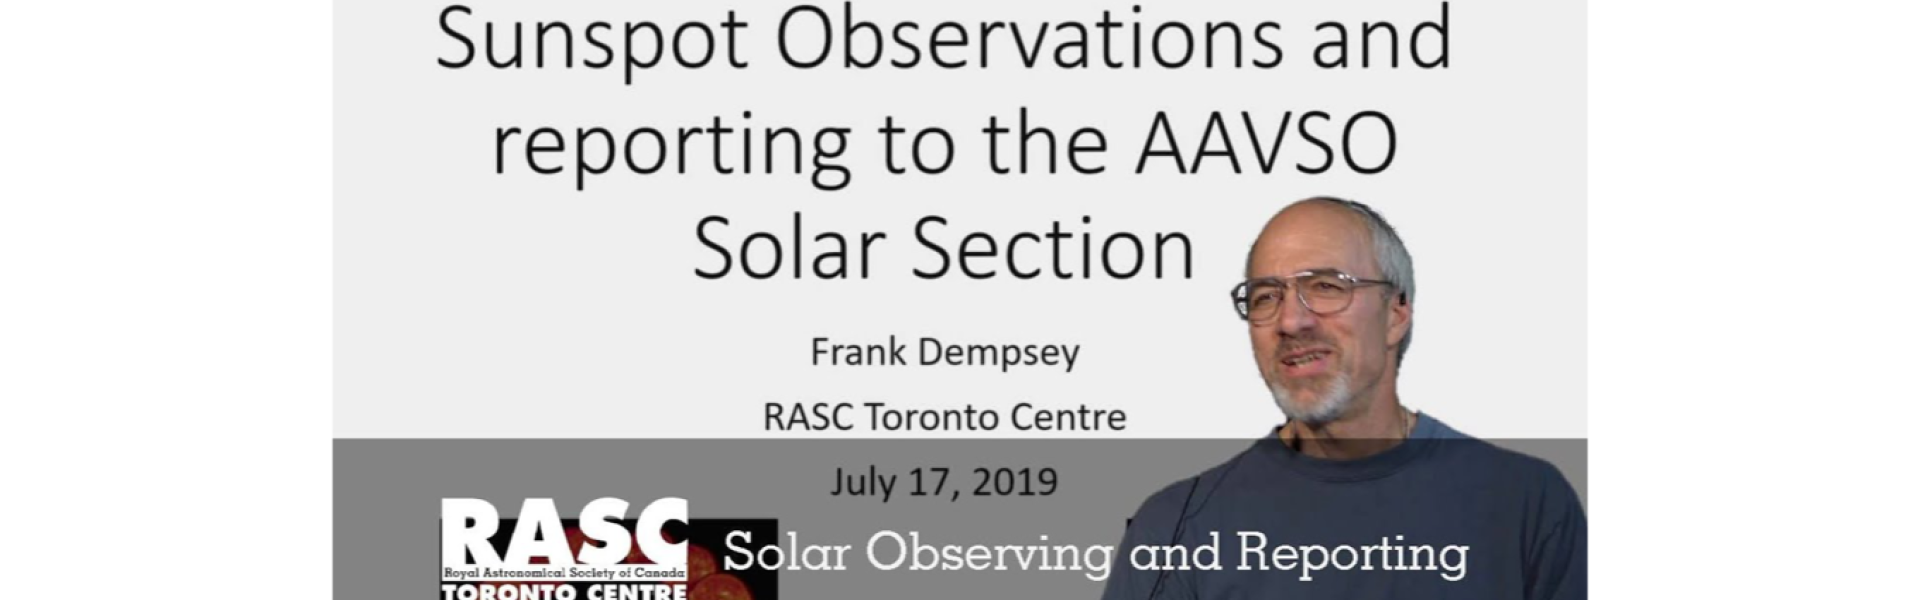 Sunspot Observations and Reporting to the AAVSO Solar Section